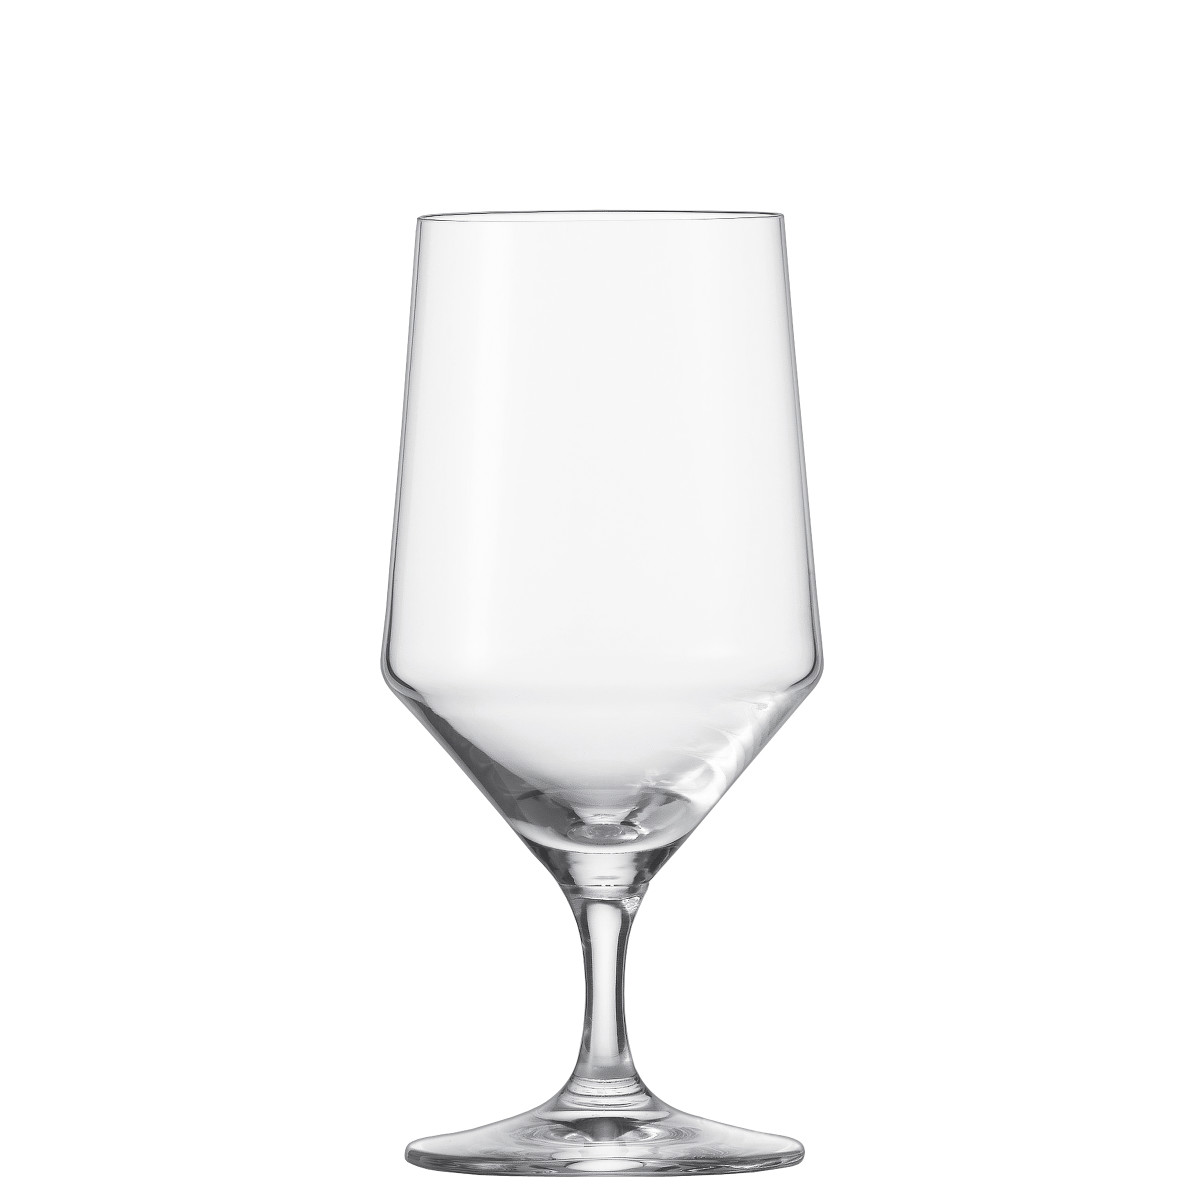 Zwiesel Glas Pure Water Goblet, Set of 6